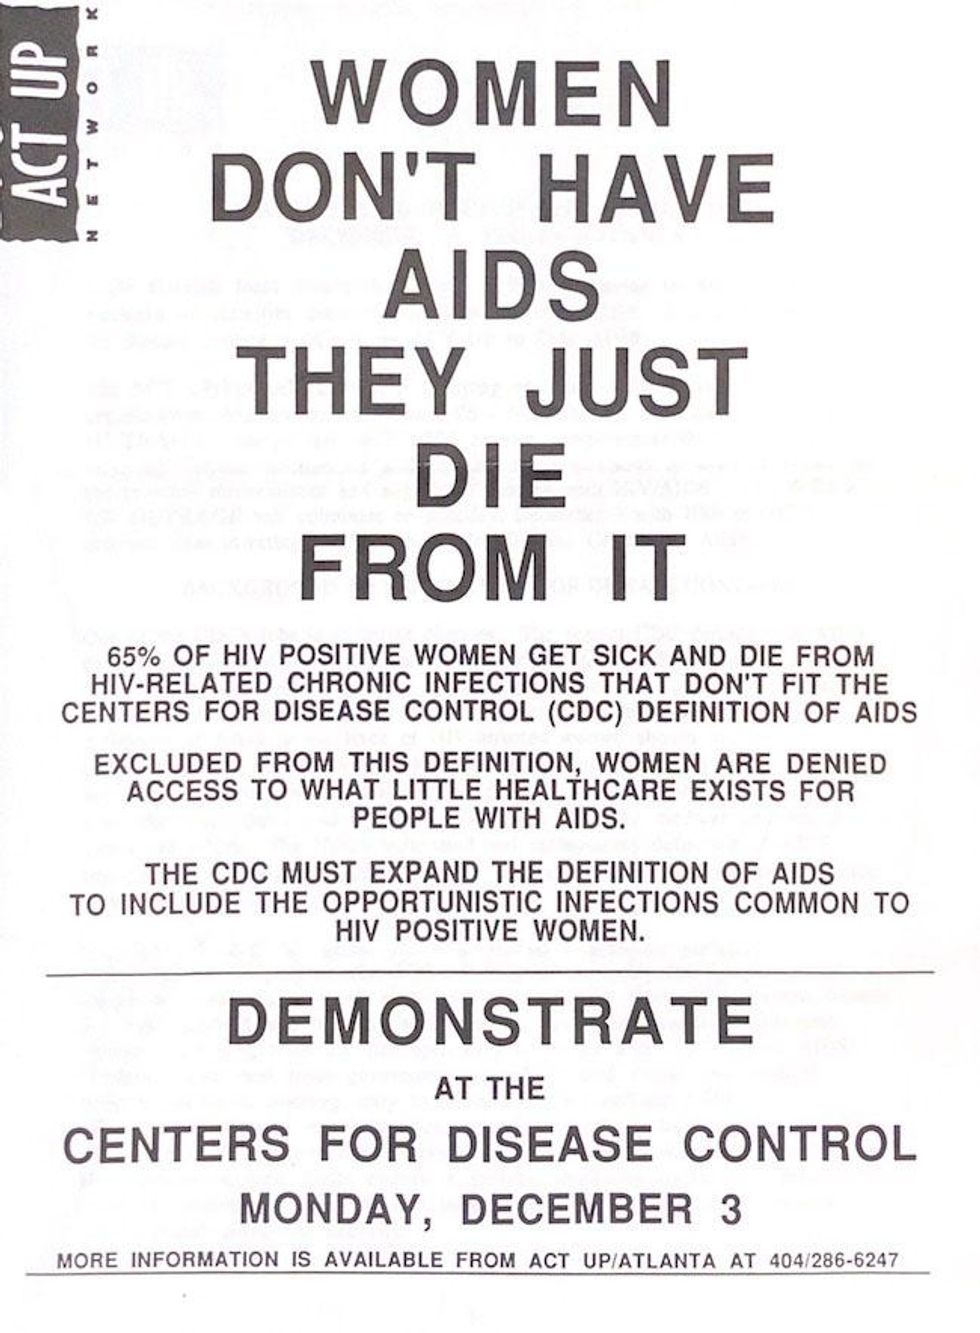 Women don't have AIDS, they just die from it, 1991.